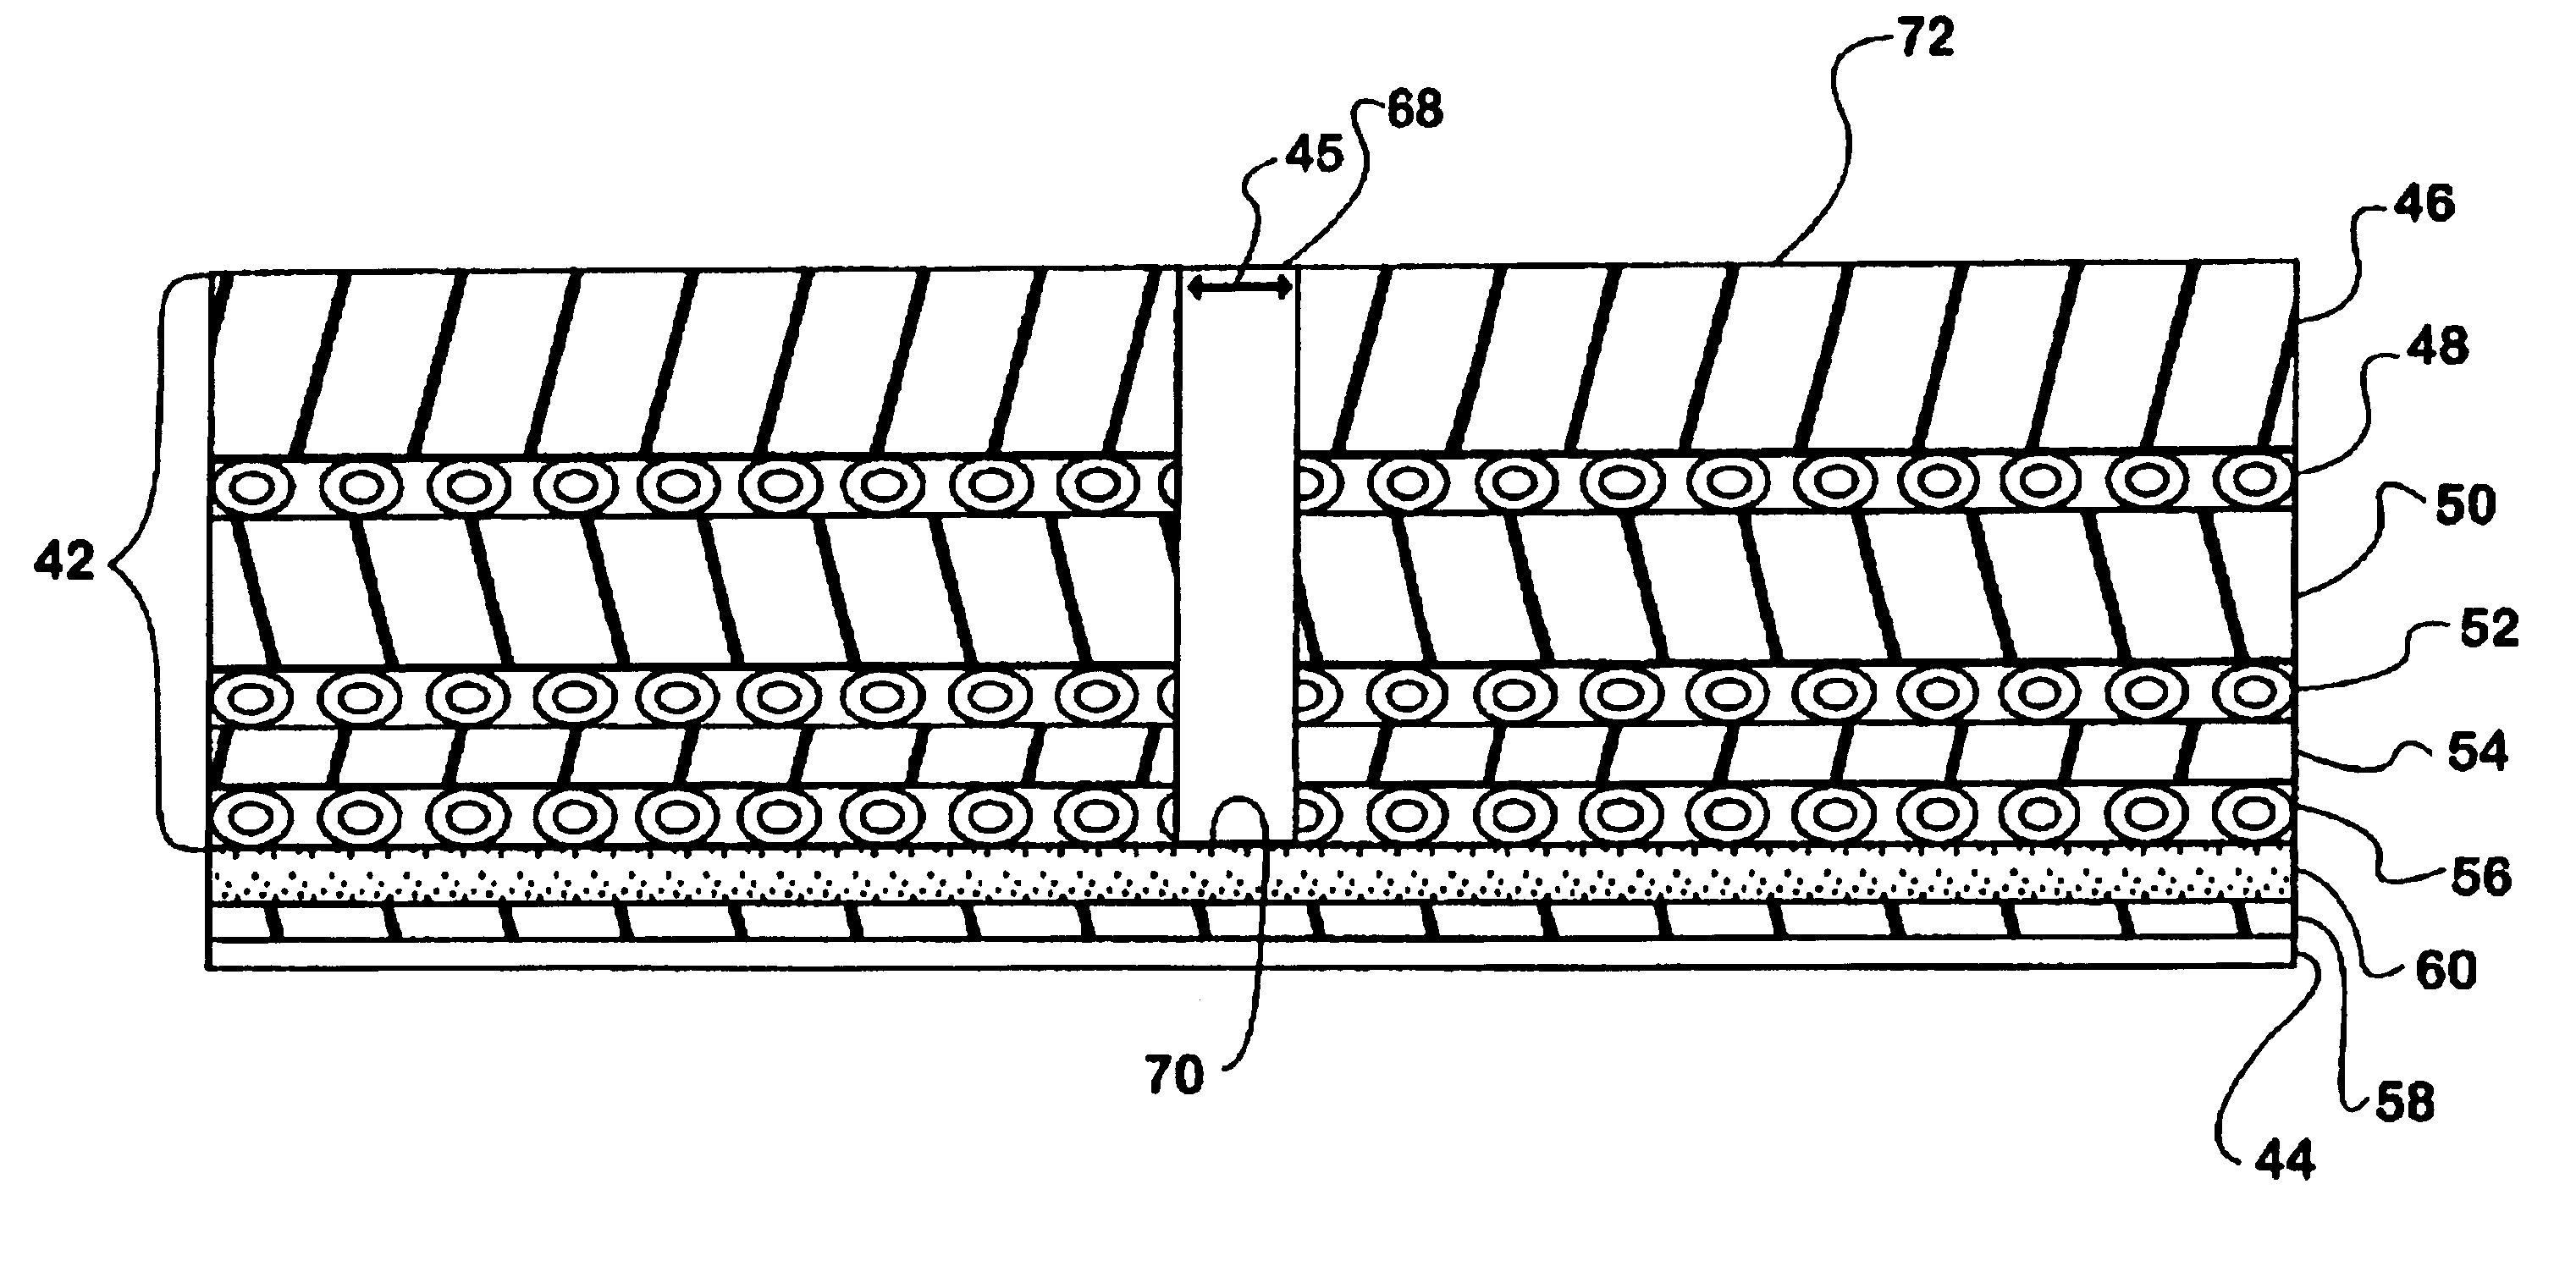 Seamed sleeved blanket and method for making and using same